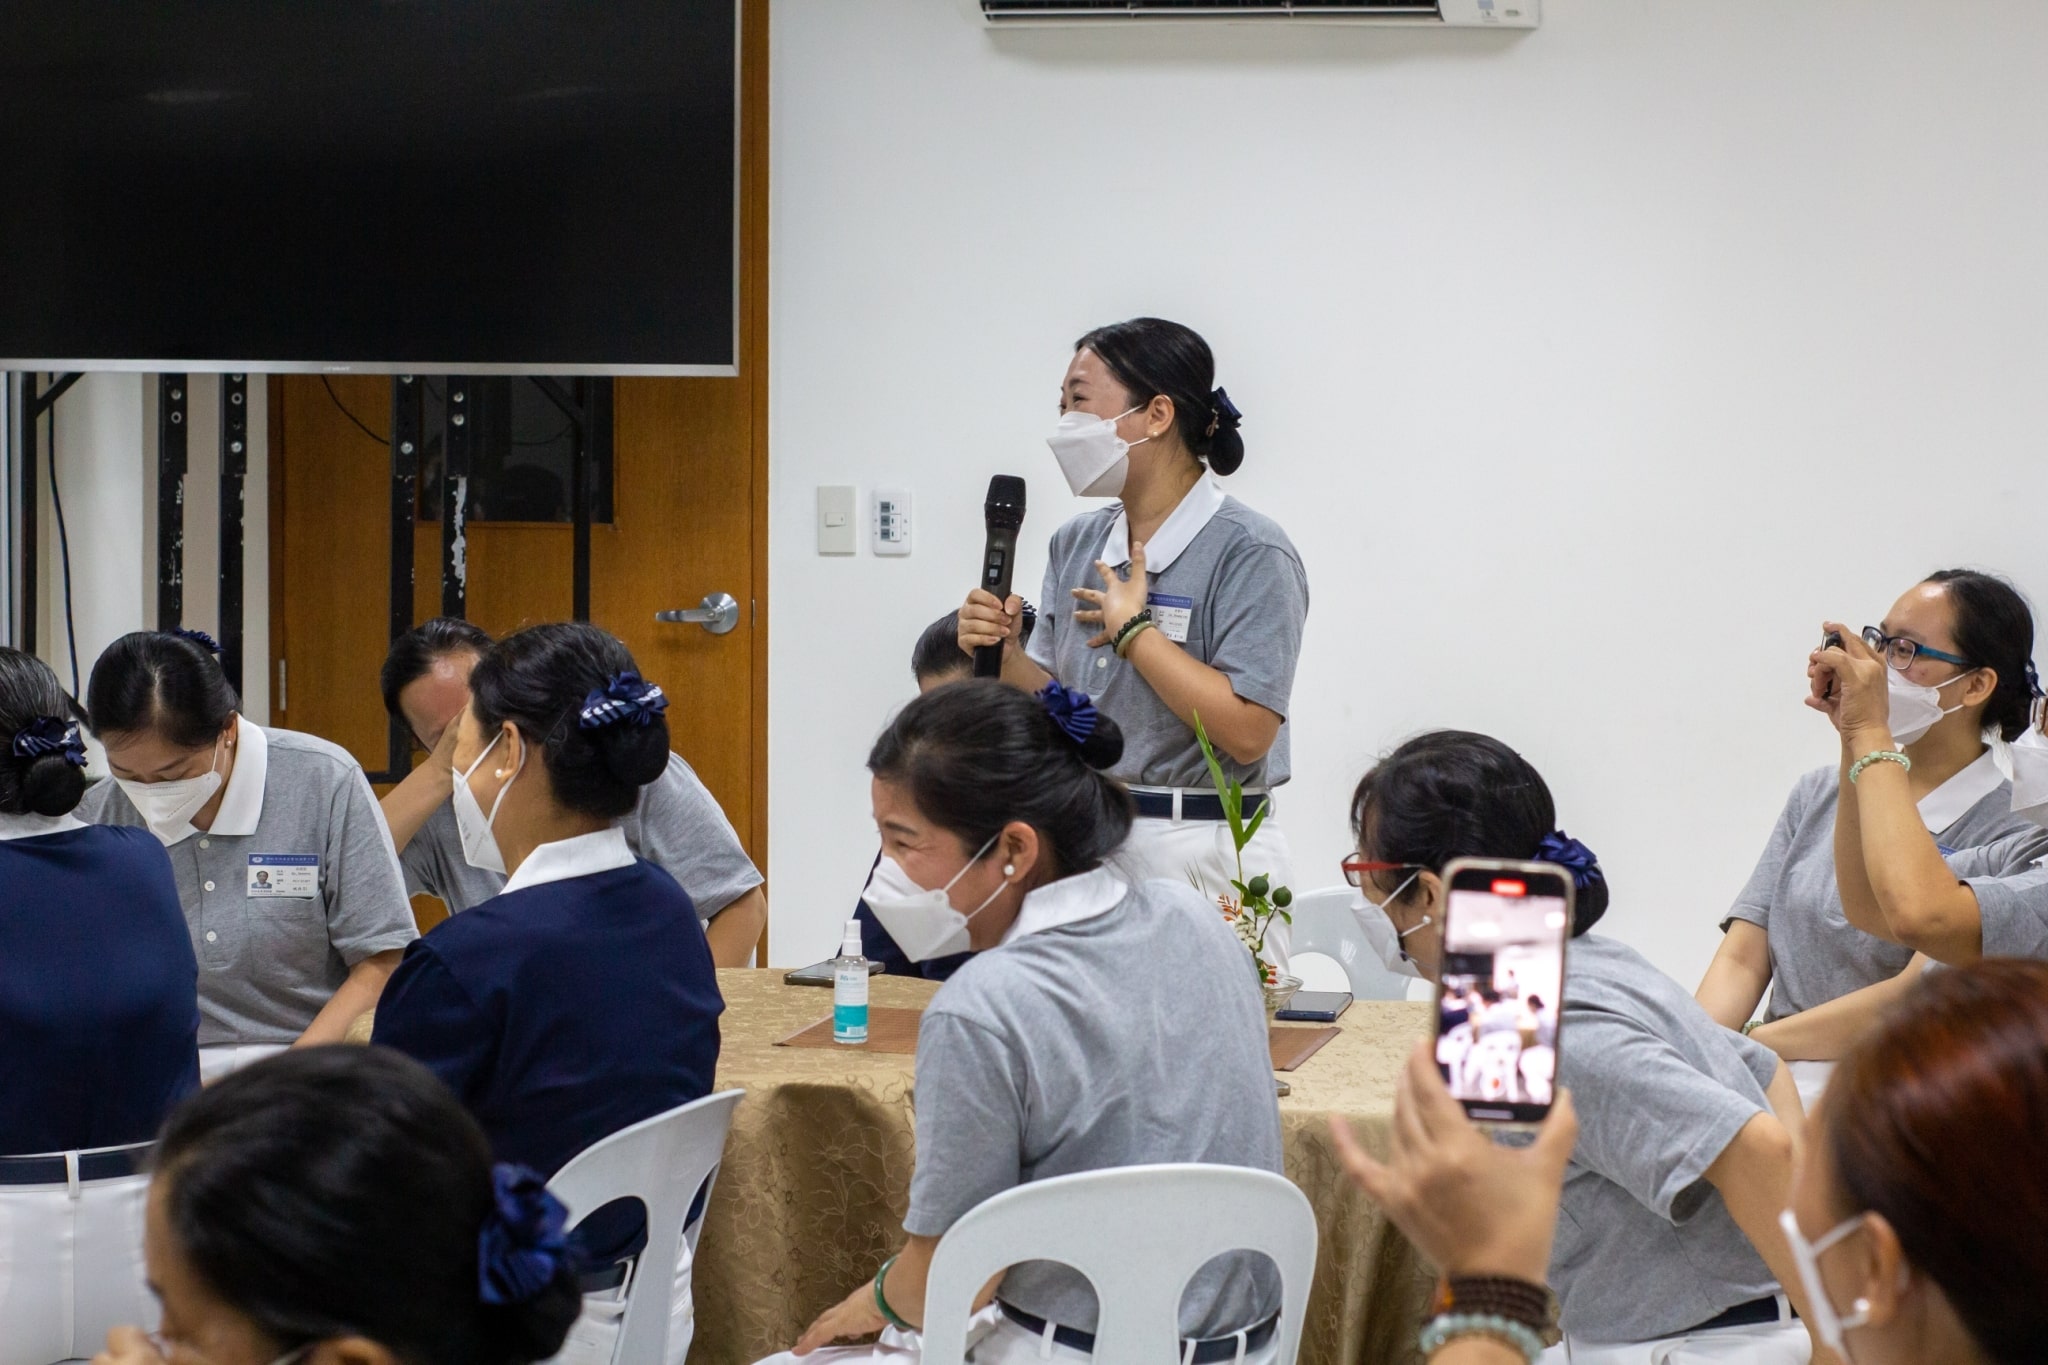 Volunteers divide in breakout groups to discuss ideas and plans in implementing Tzu Chi’s programs.【Photo by Marella Saldonido】